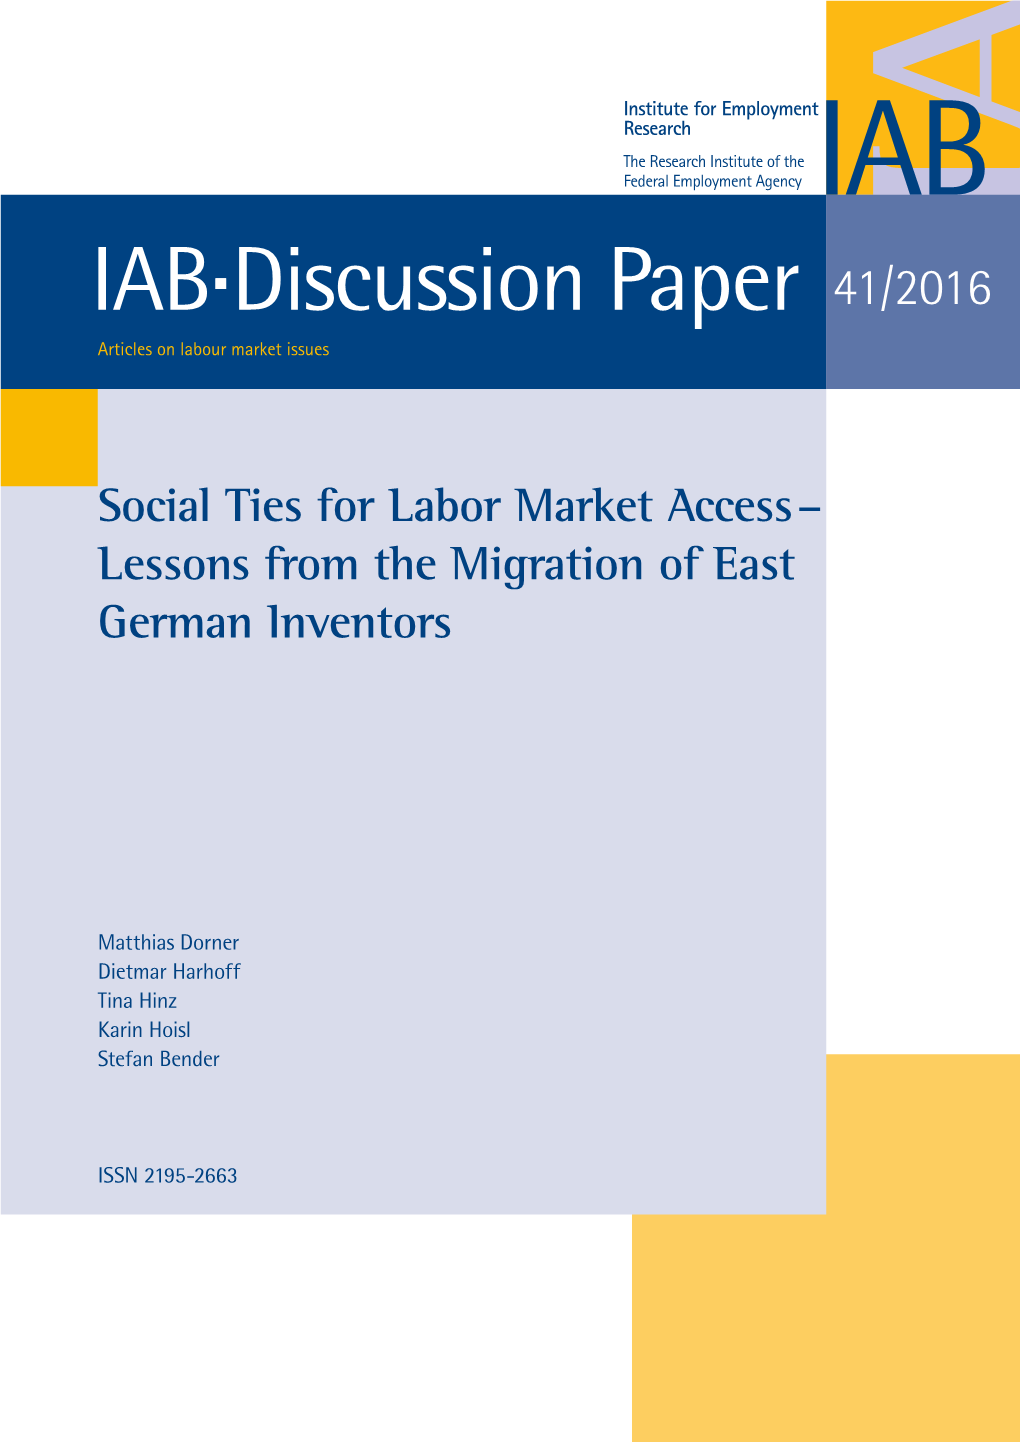 Social Ties for Labor Market Access – Lessons from the Migration of East German Inventors